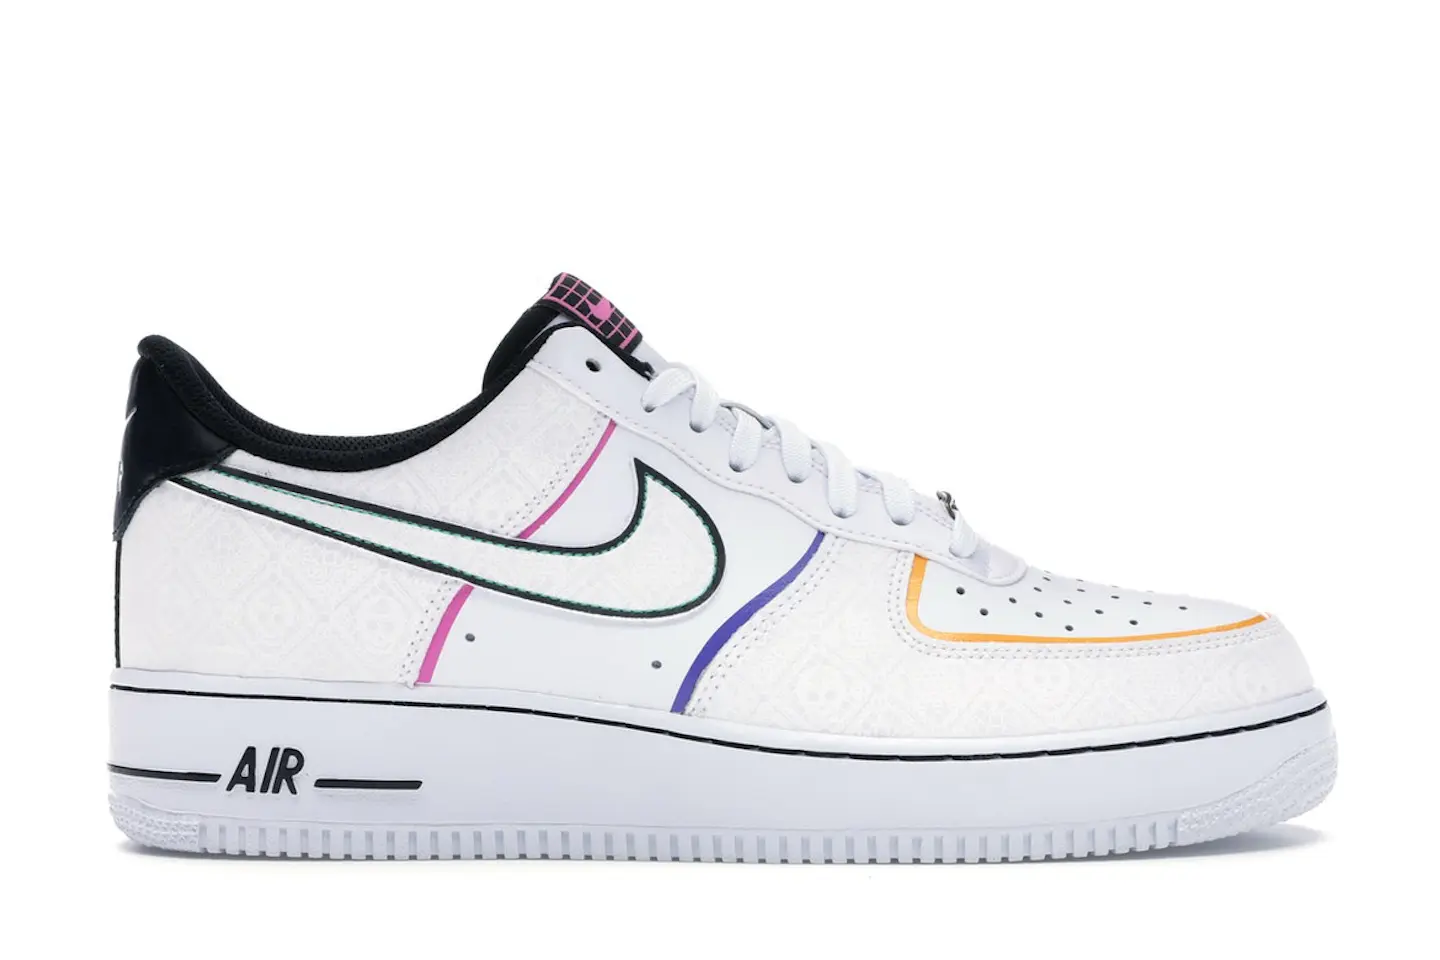 Nike Air Force 1 Low Day of the Dead (2019) Men's - CT1138-100 - US